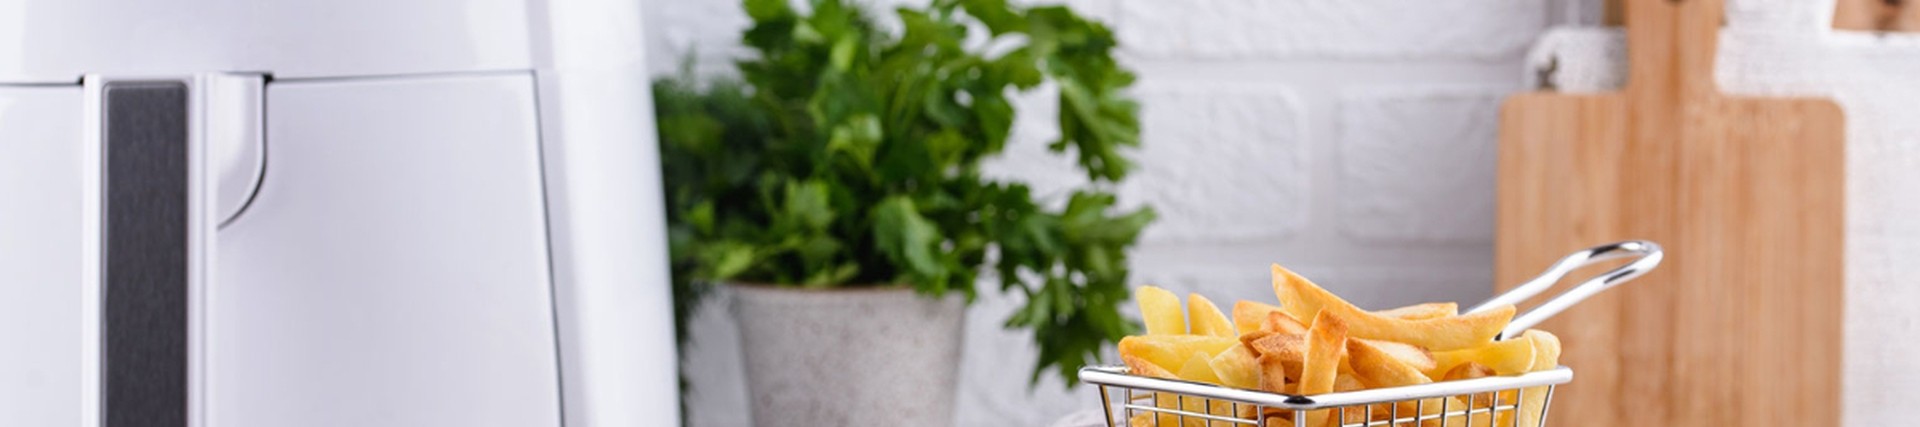 An air-fryer showing a small basket full of chips, with leafy herbs dotted around the image.